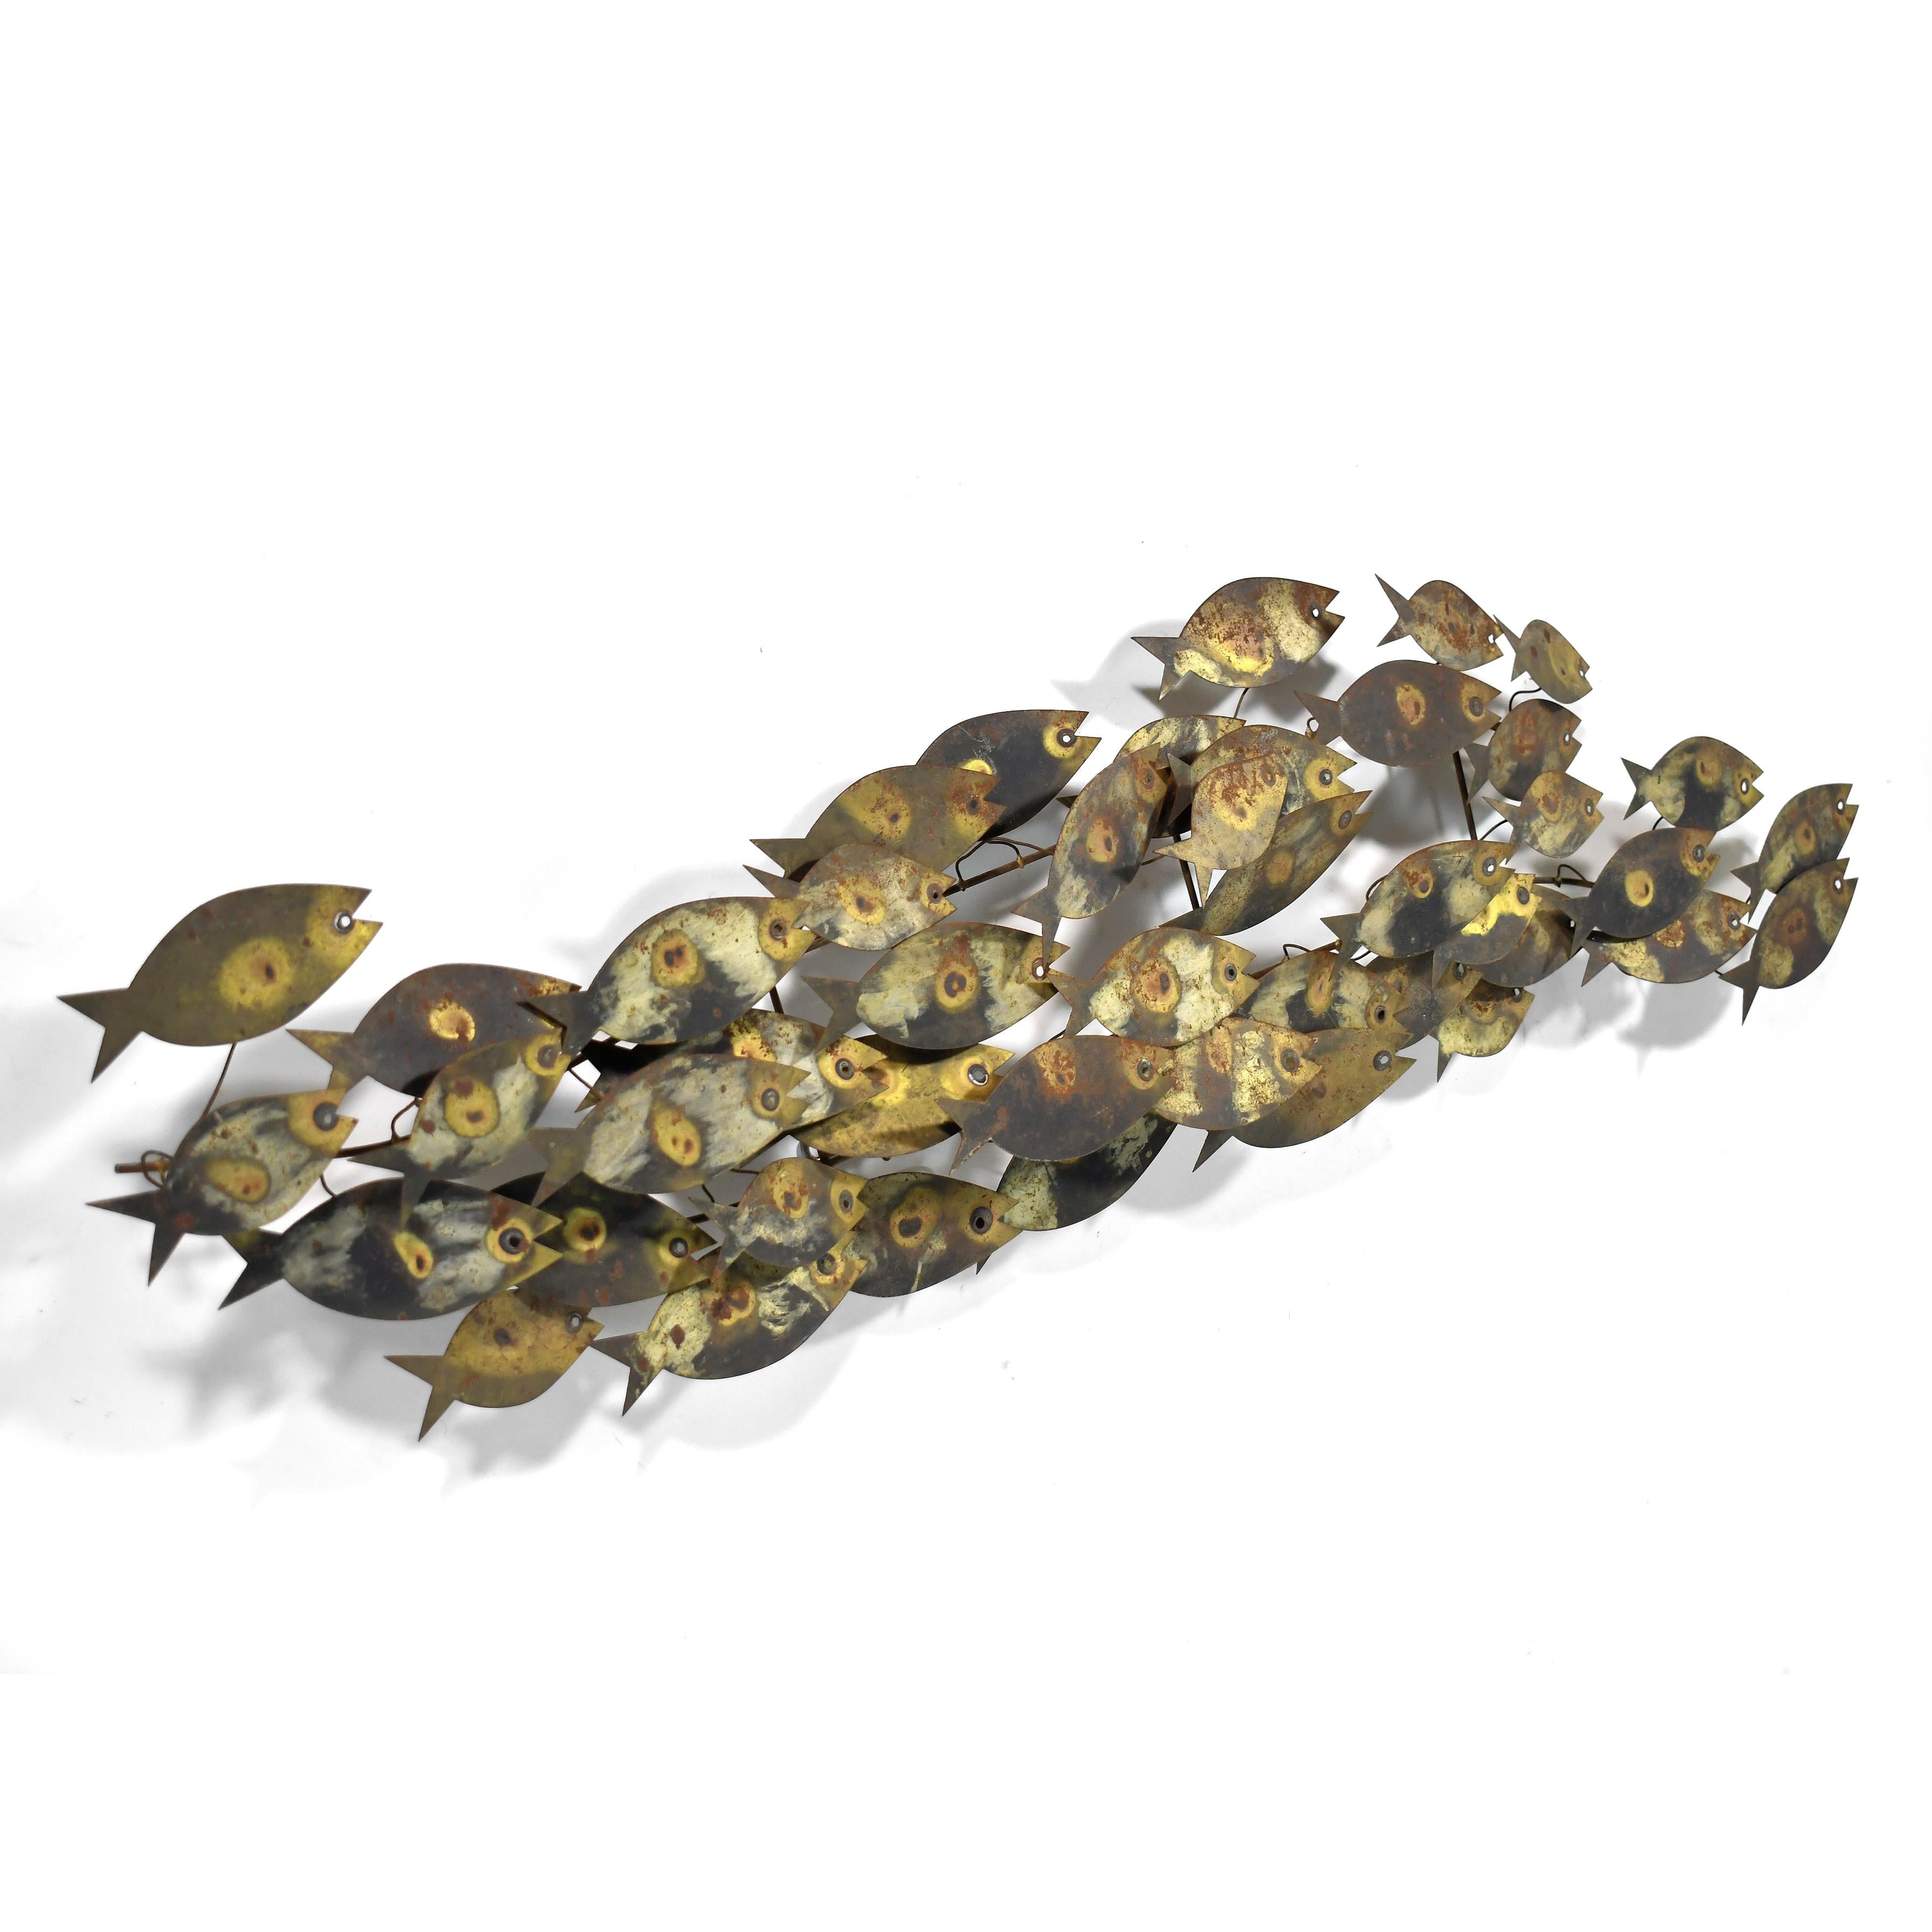 This early design by Curtis Jere for Artisan House features a dense school of fish swimming together.

Cleverly balancing the representational and abstract, the sculpture activates any wall it is hung on.

14